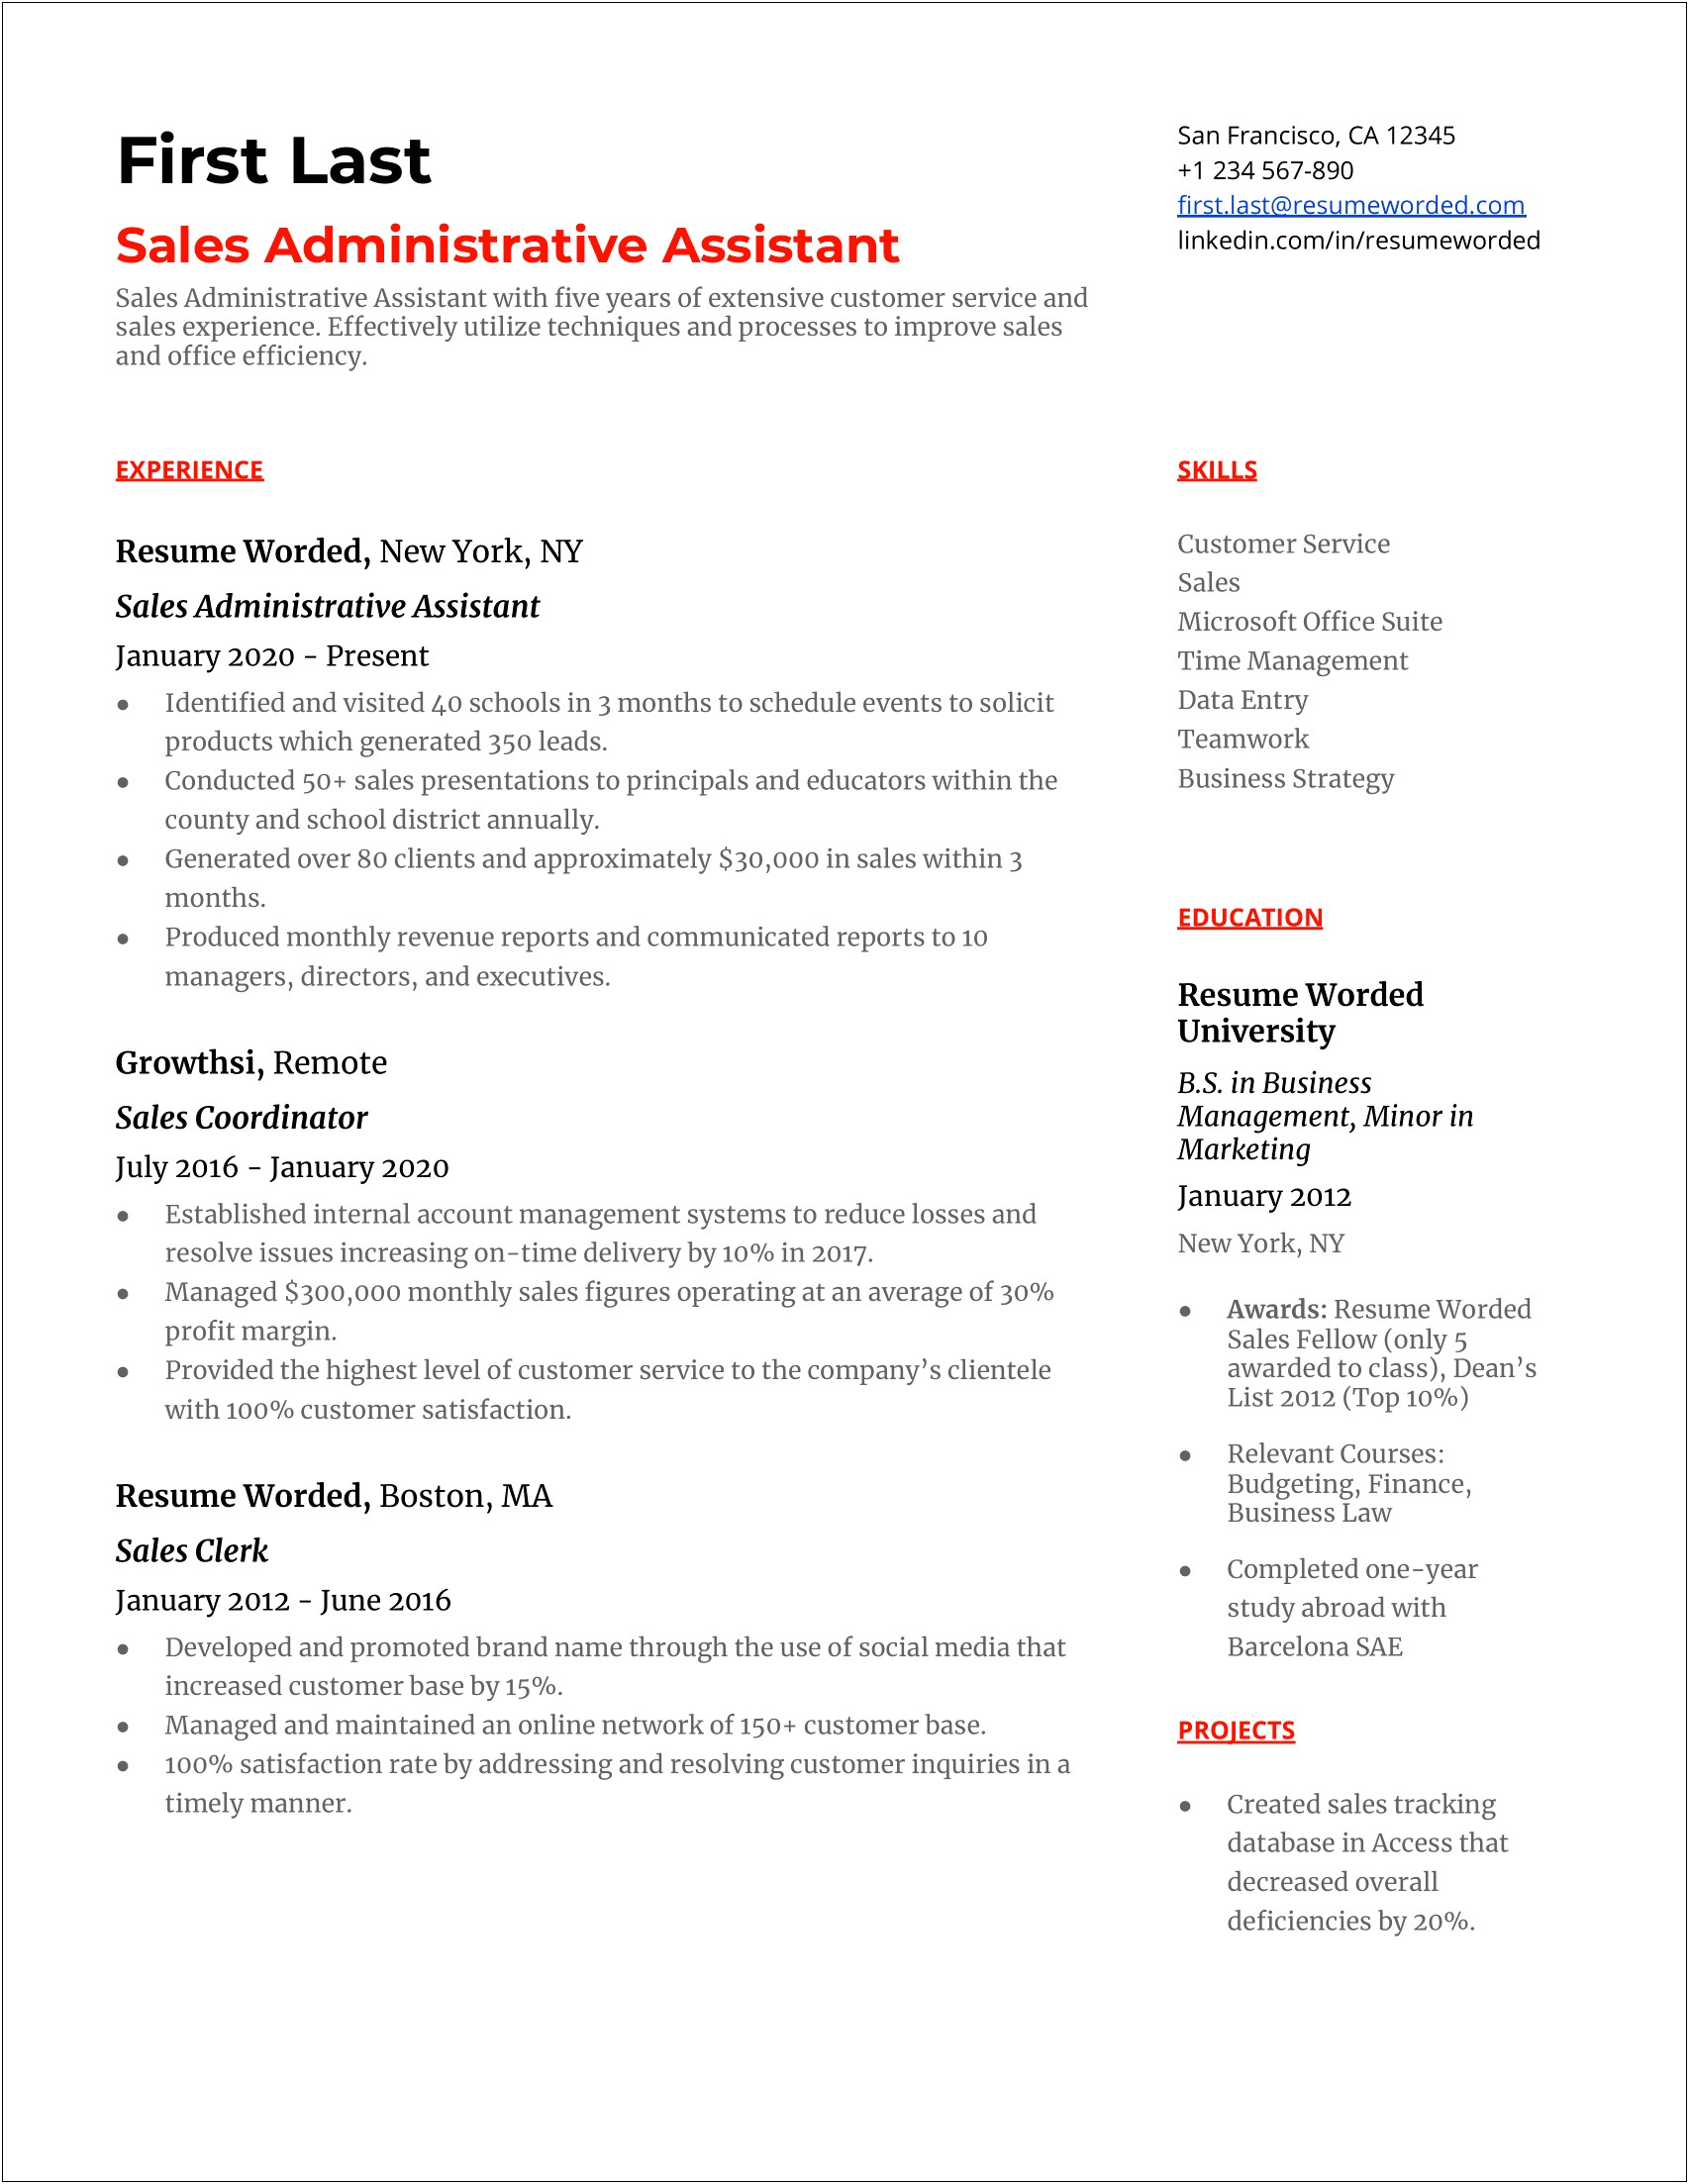 Resume Objective For Senior Administrative Assistant